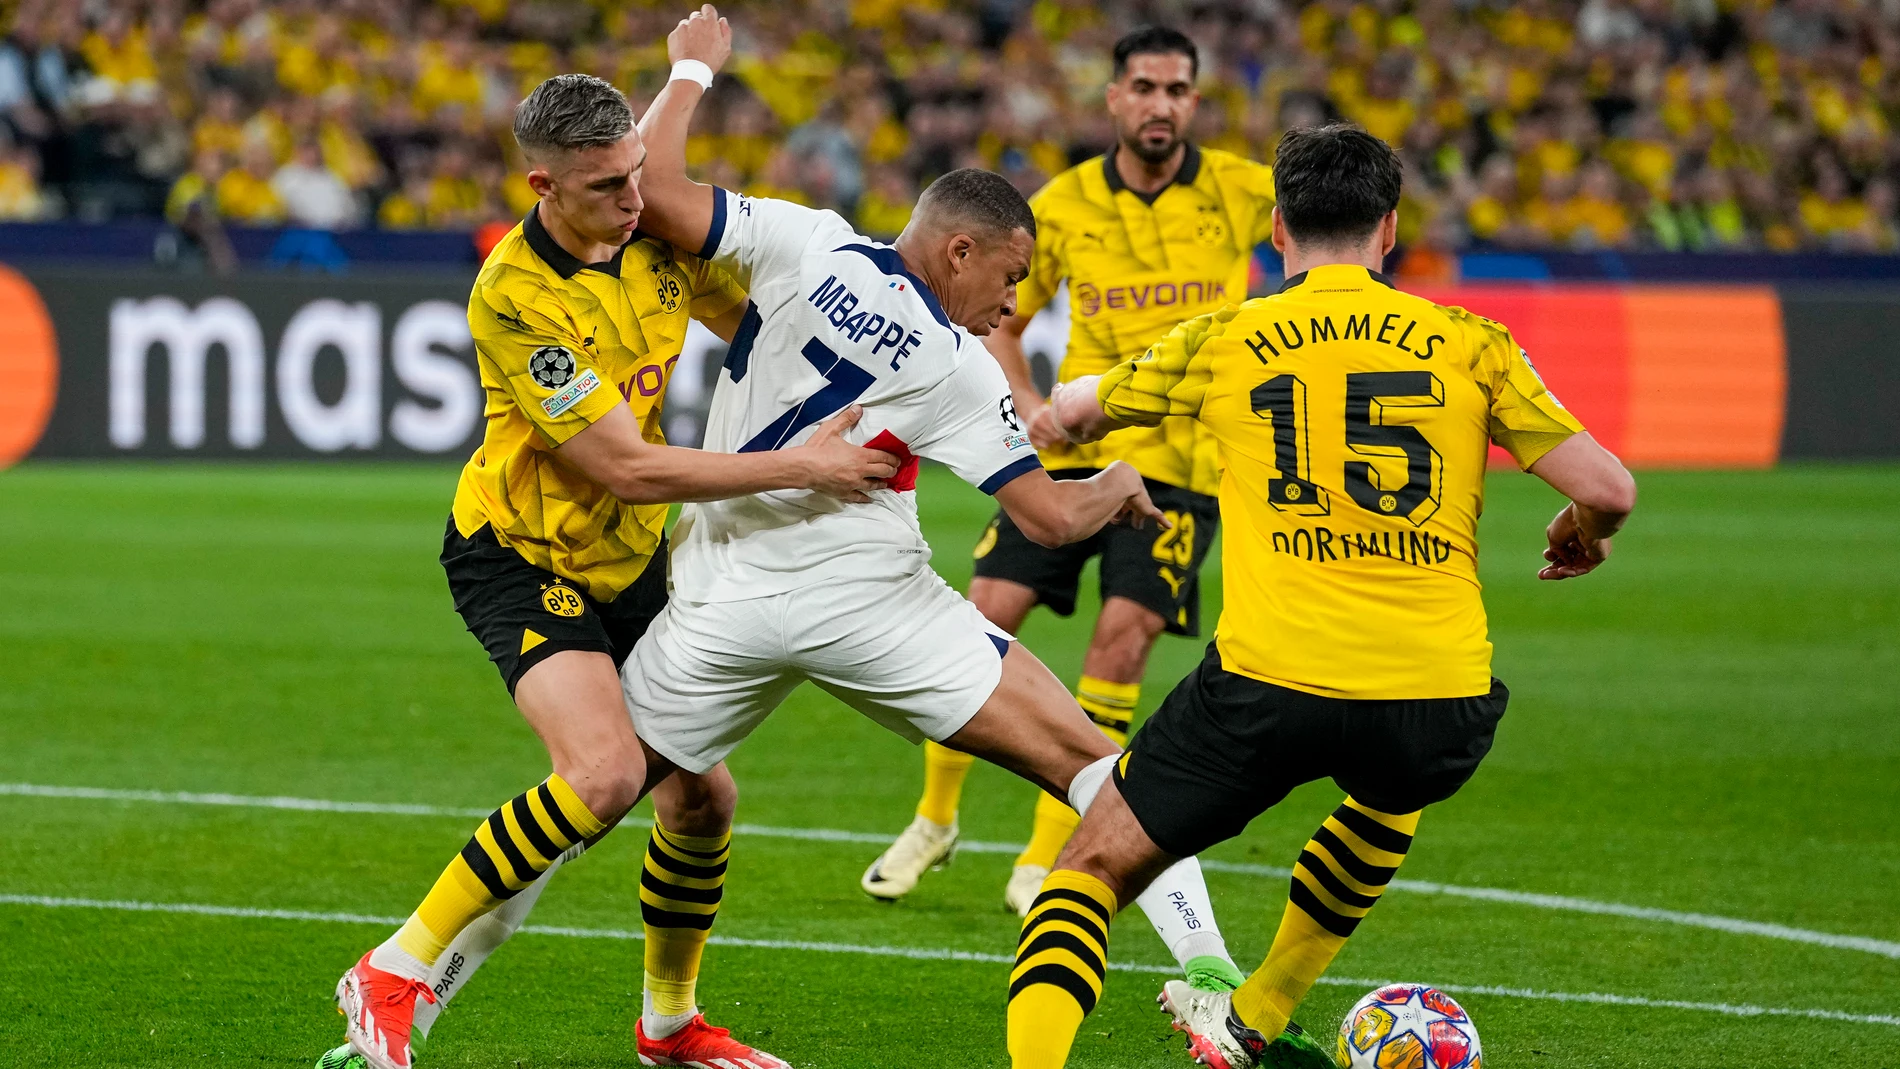 PSG's Kylian Mbappe, center, is challenged by Dortmund's Nico Schlotterbeck, left, and Mats Hummels during the Champions League semifinal first leg soccer match between Borussia Dortmund and Paris Saint-Germain at the Signal-Iduna Park in Dortmund, Germany, Wednesday, May 1, 2024. (AP Photo/Martin Meissner)